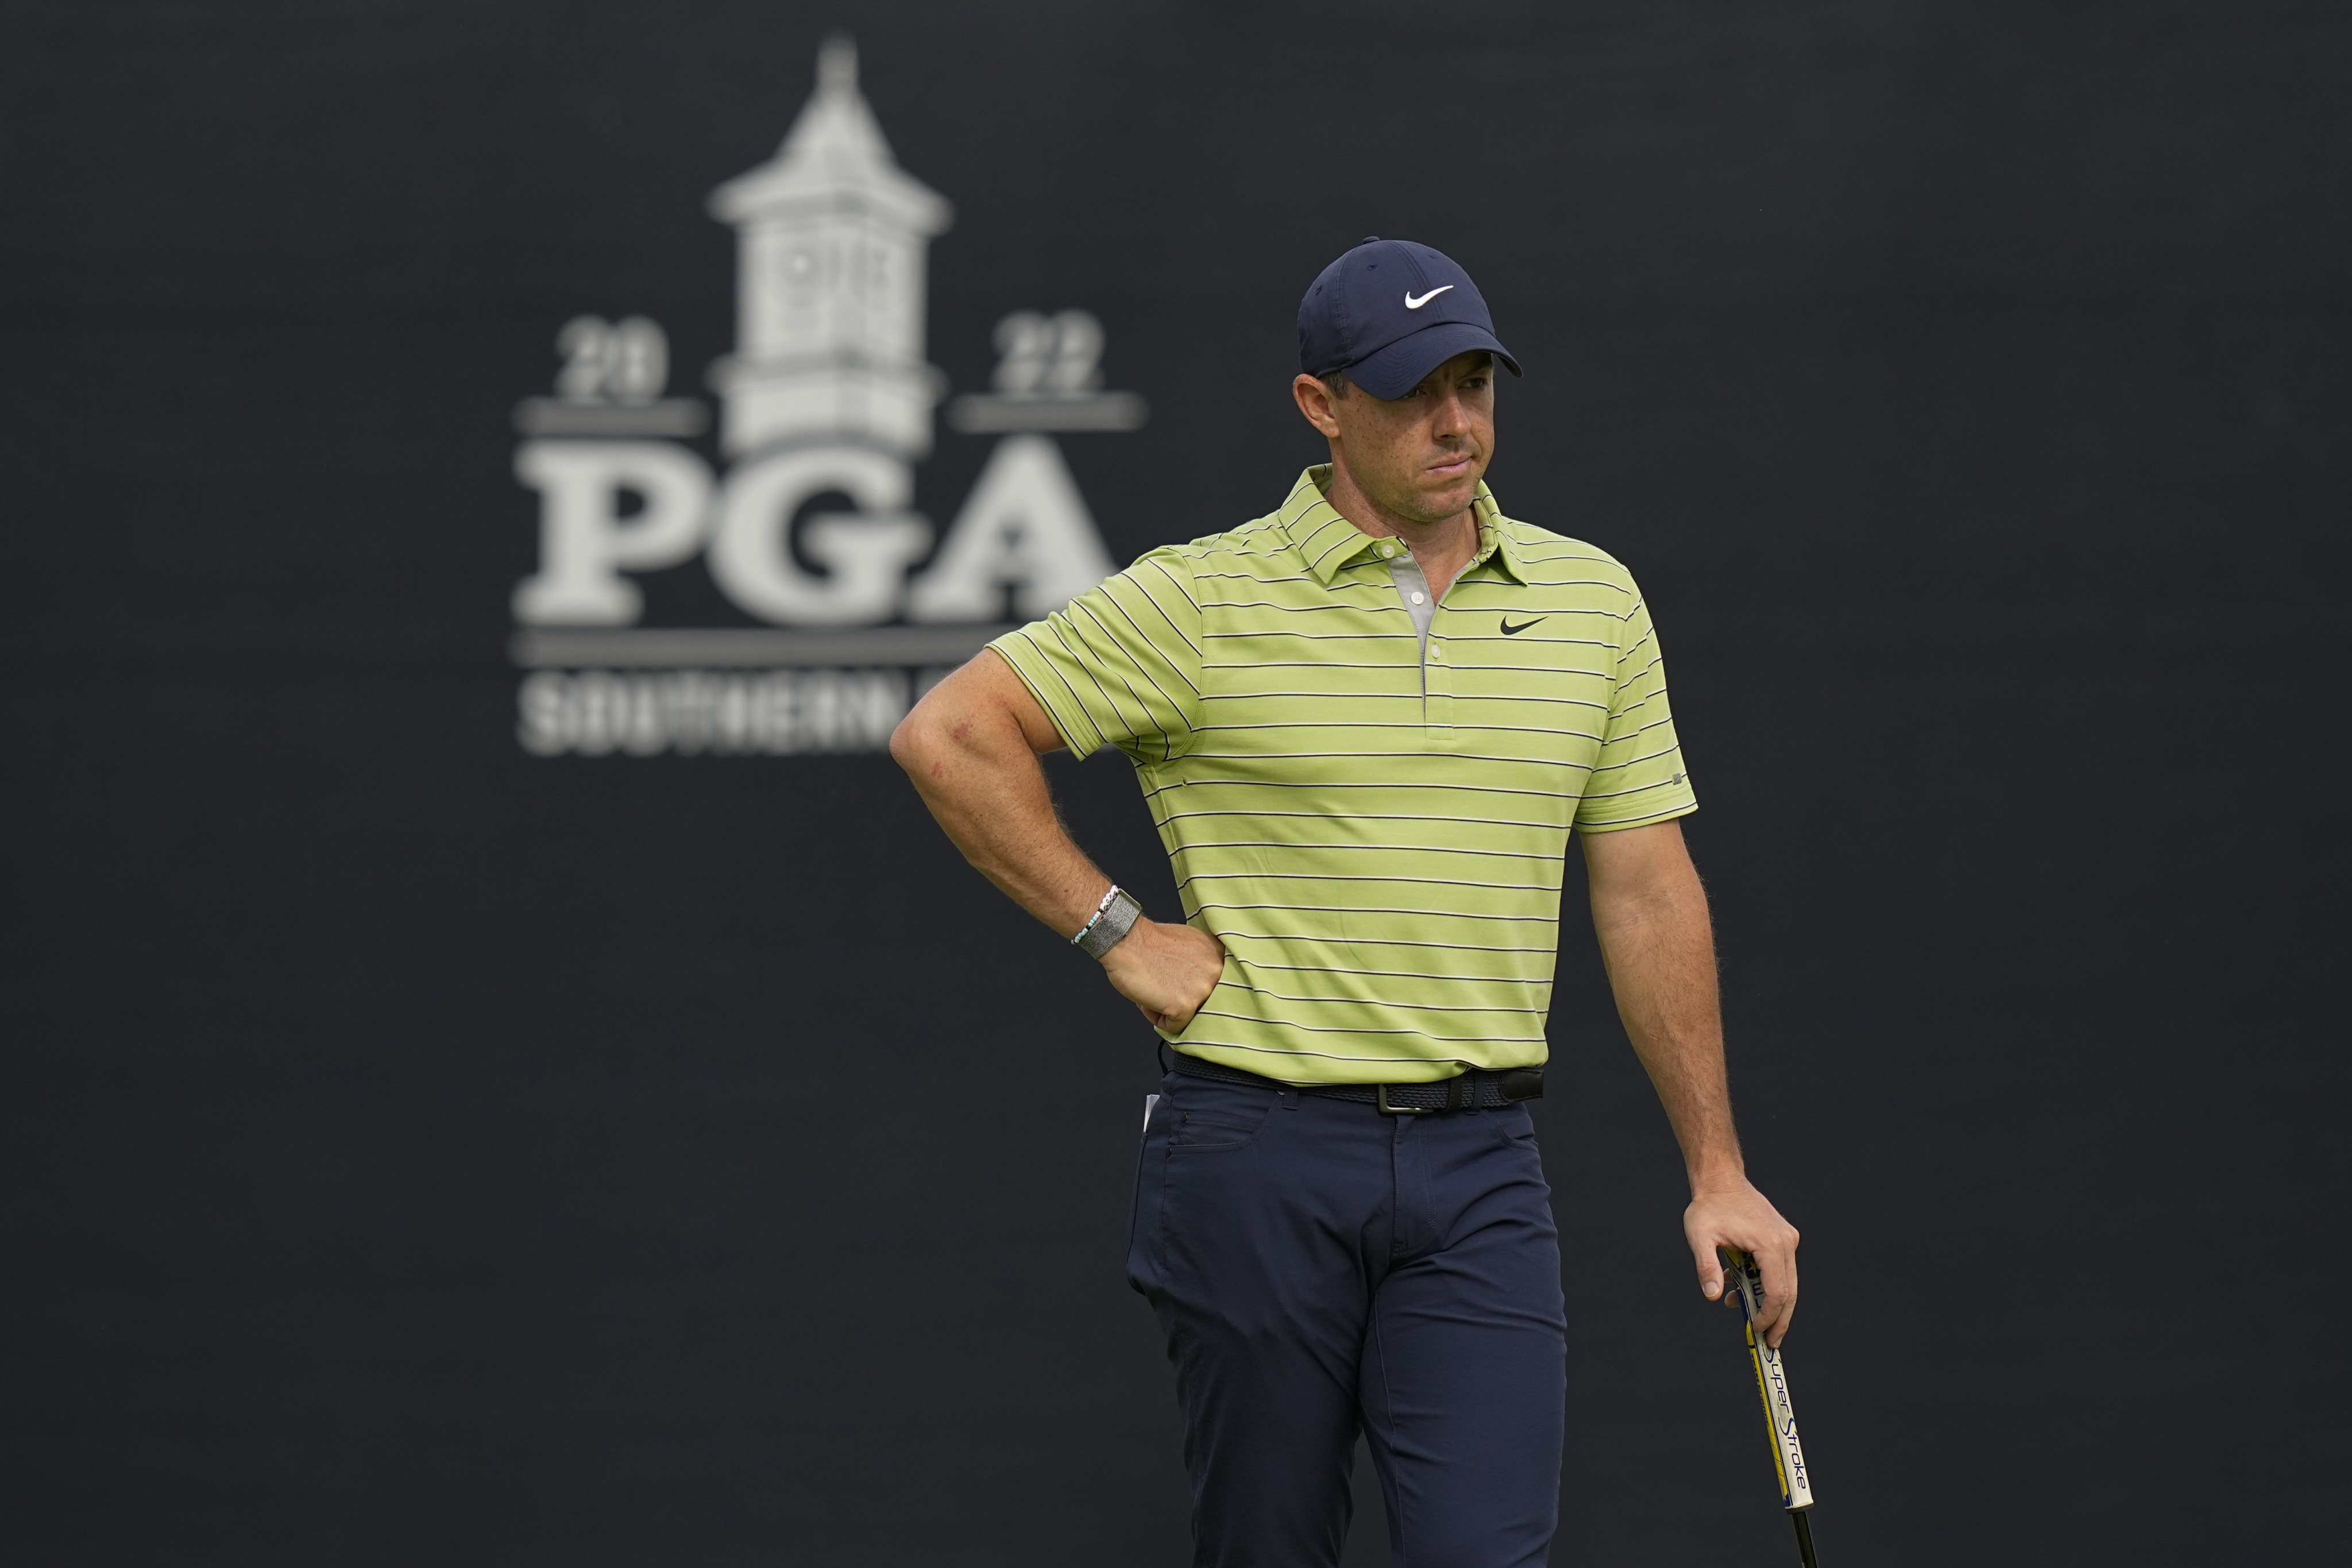 Rory McIlroy waits to tee-off on 12 during the first round of the PGA Championship. Photo: AP